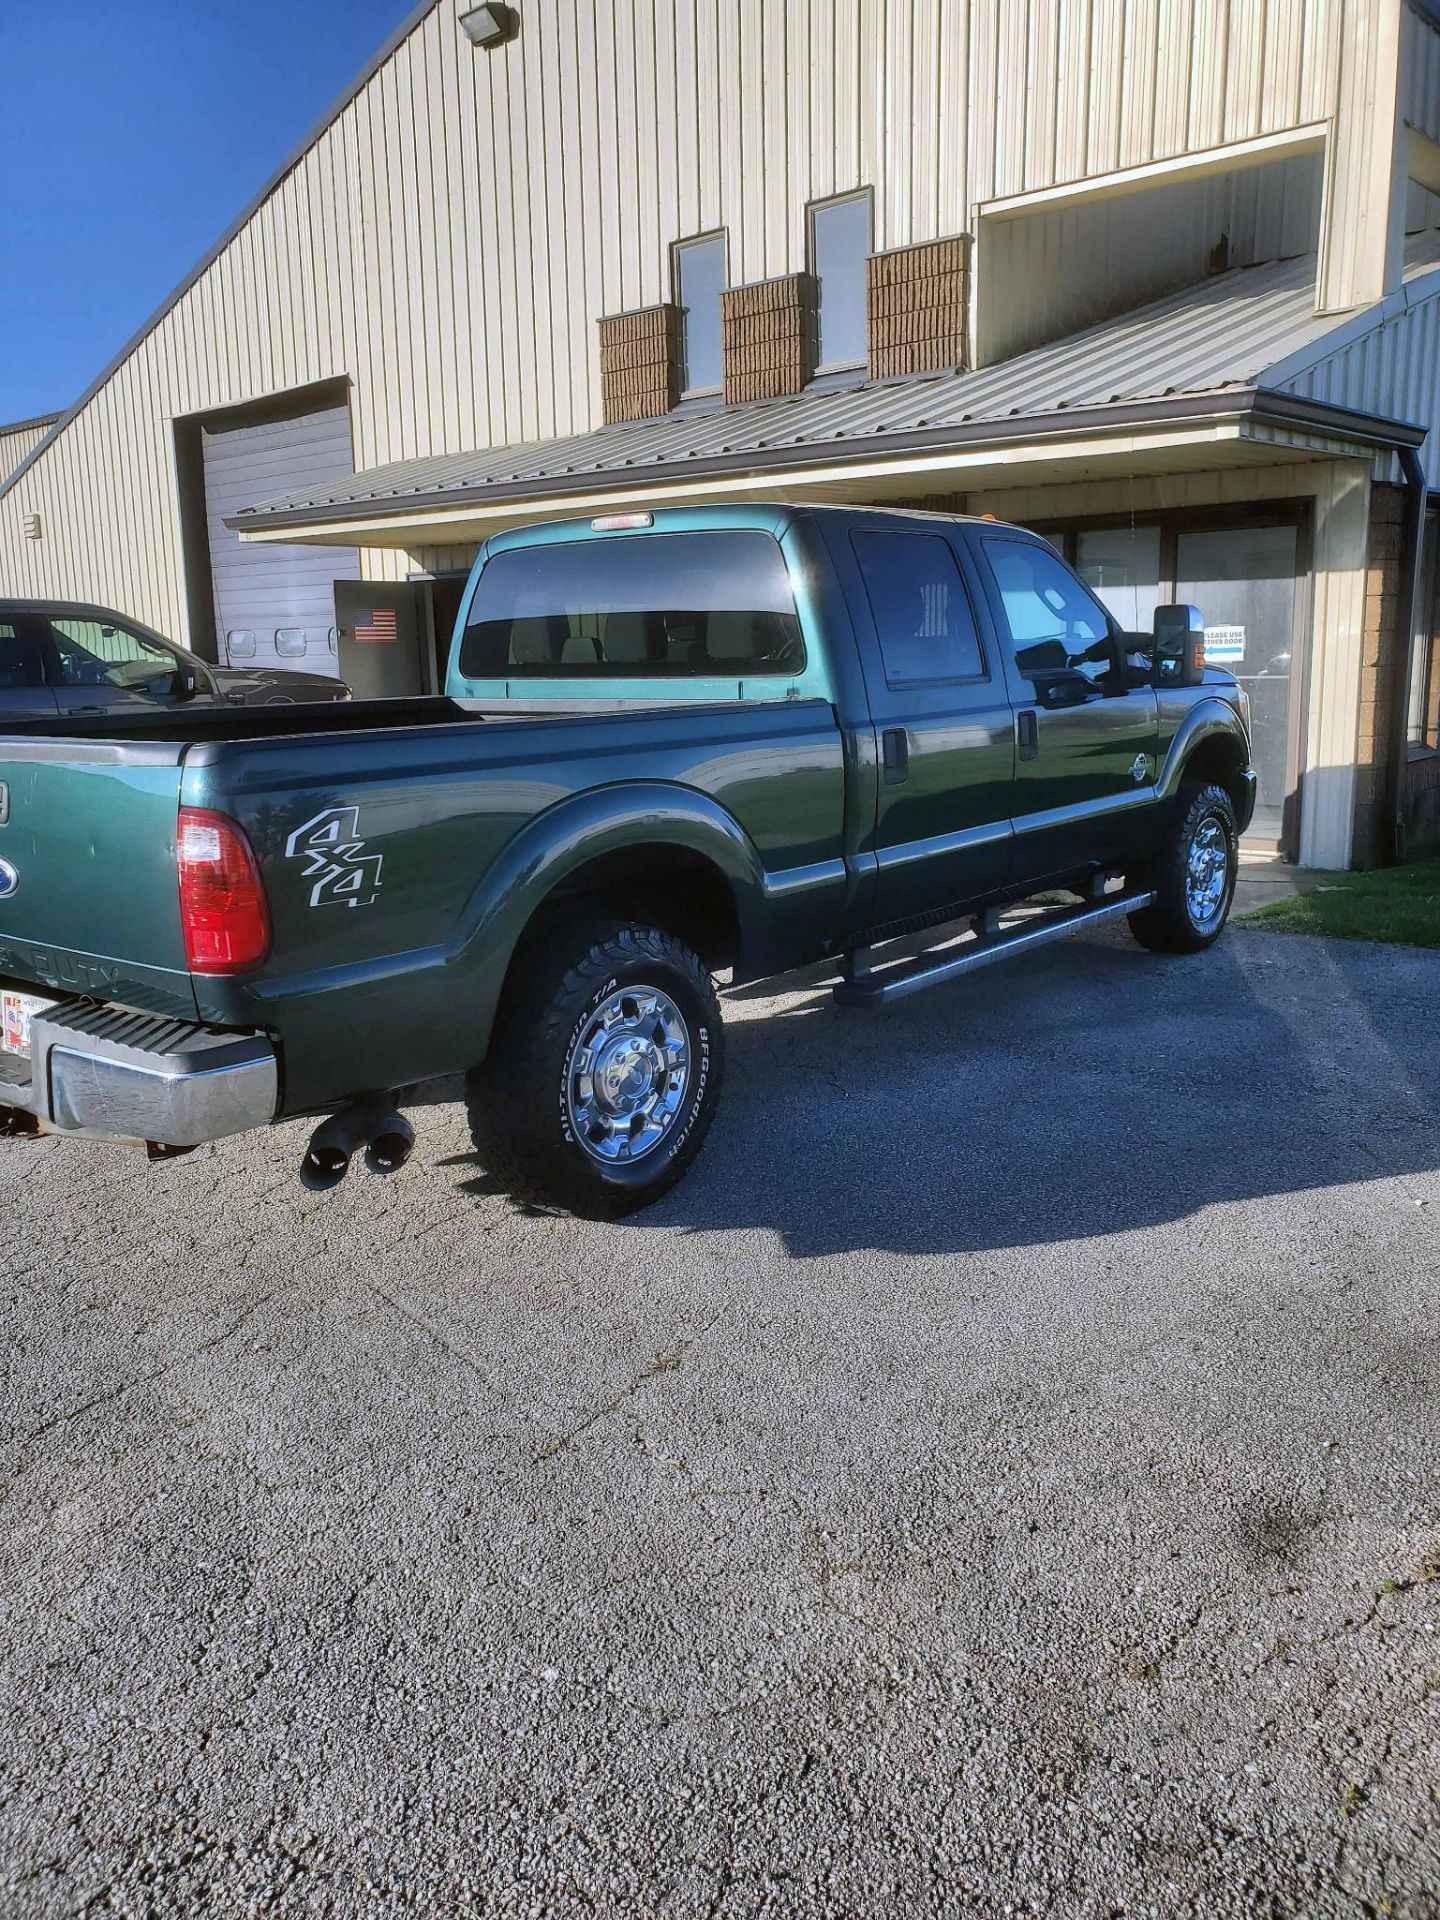 PICK-UP TRUCK, 2012 FORD F-250 SUPER DUTY XLT 4X4 CREW CAB, B20 diesel, running boards, 175,000 mile - Image 3 of 13